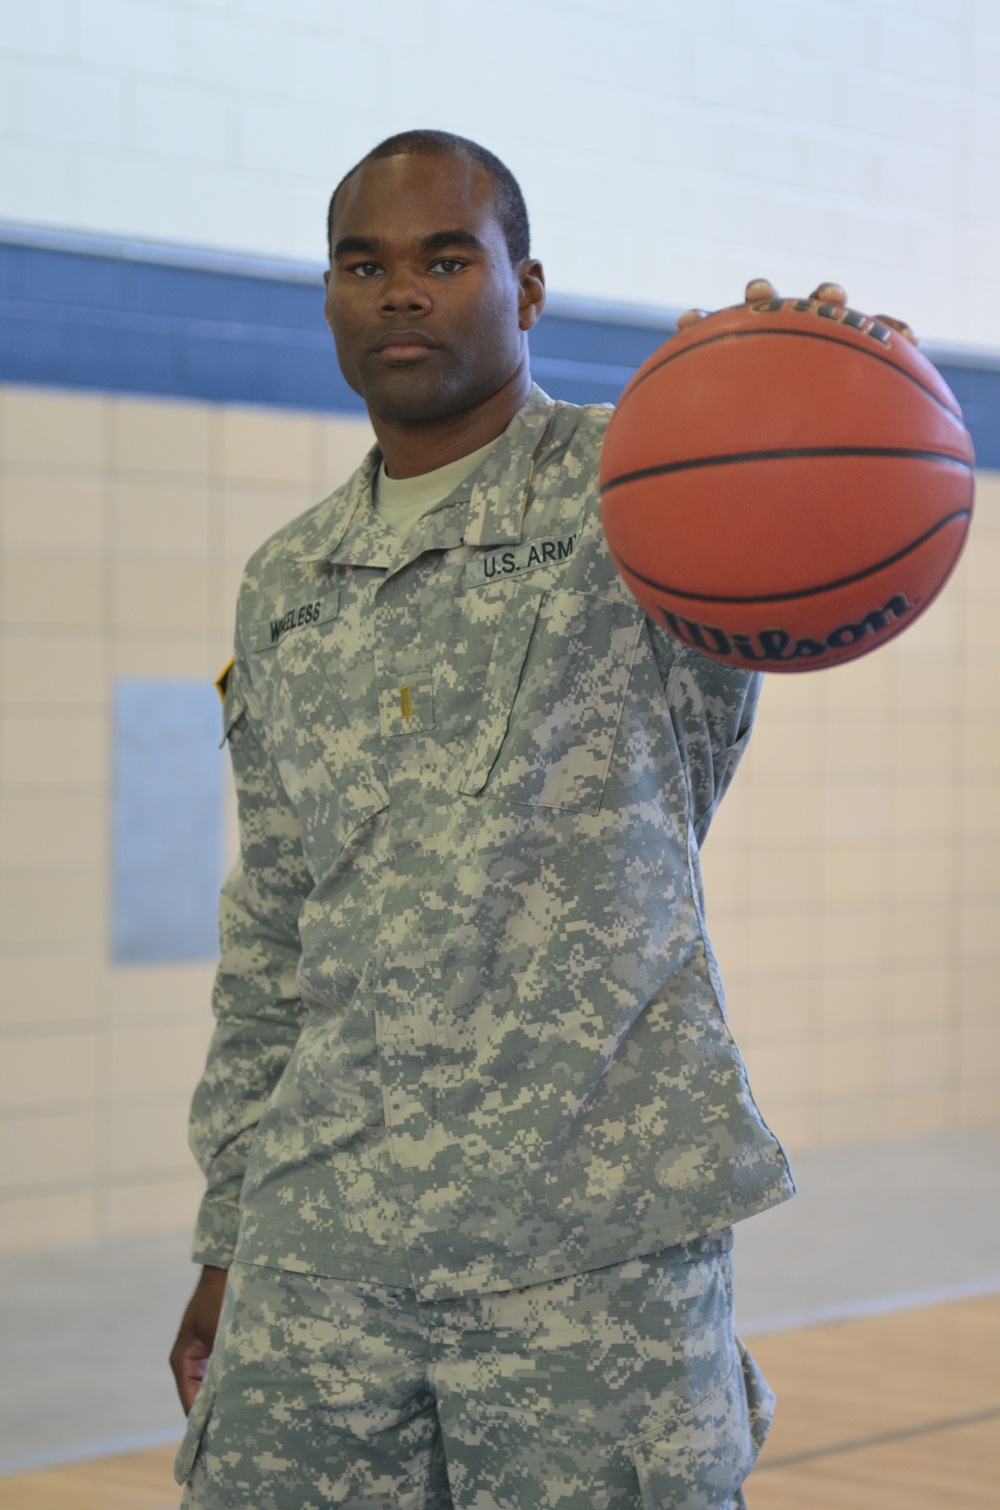 Sledgehammer soldier selected for All-Army basketball camp